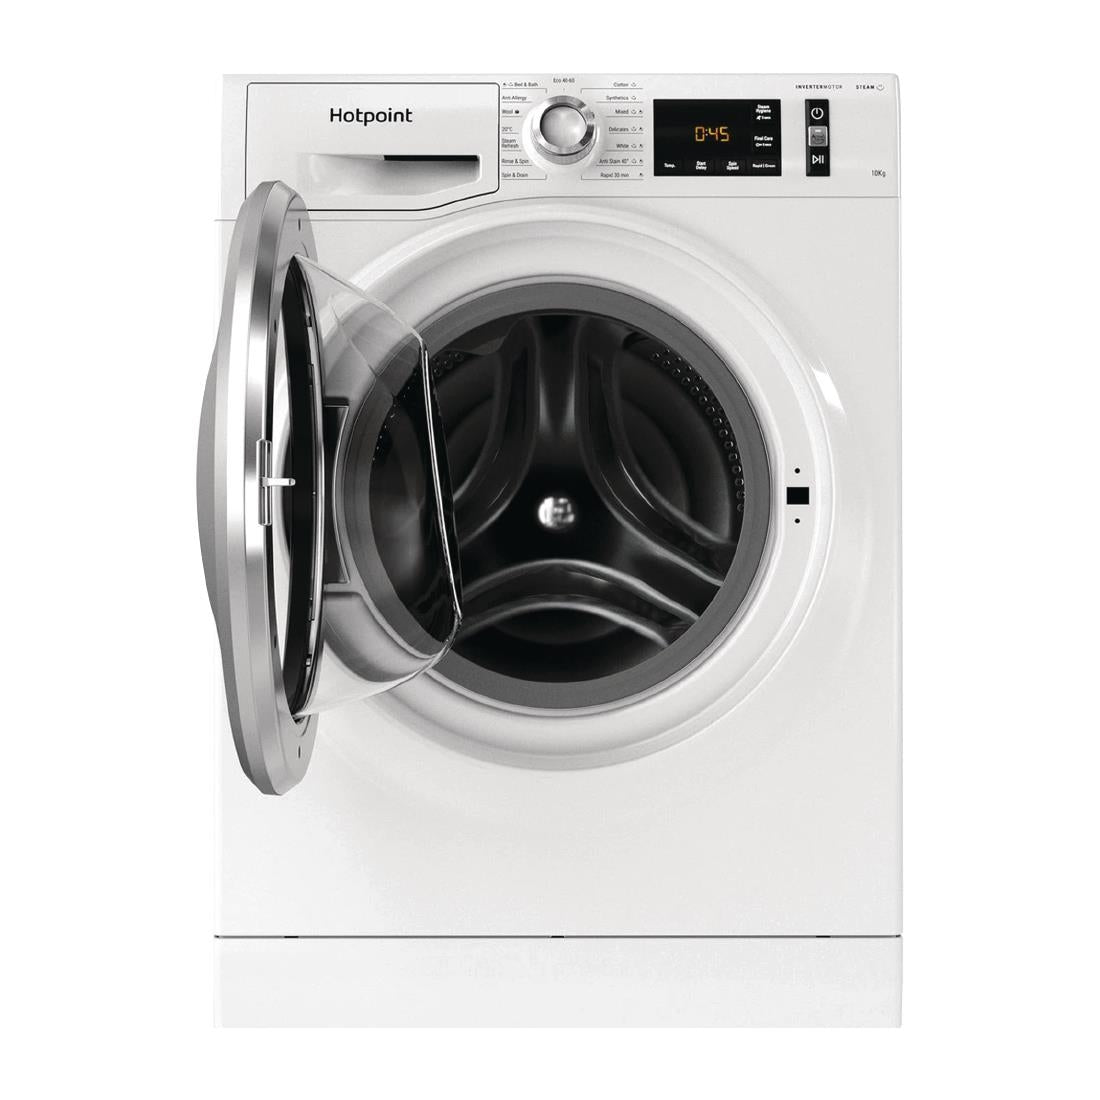 Hotpoint ActiveCare Washing Machine NM11 1045 WC A JD Catering Equipment Solutions Ltd